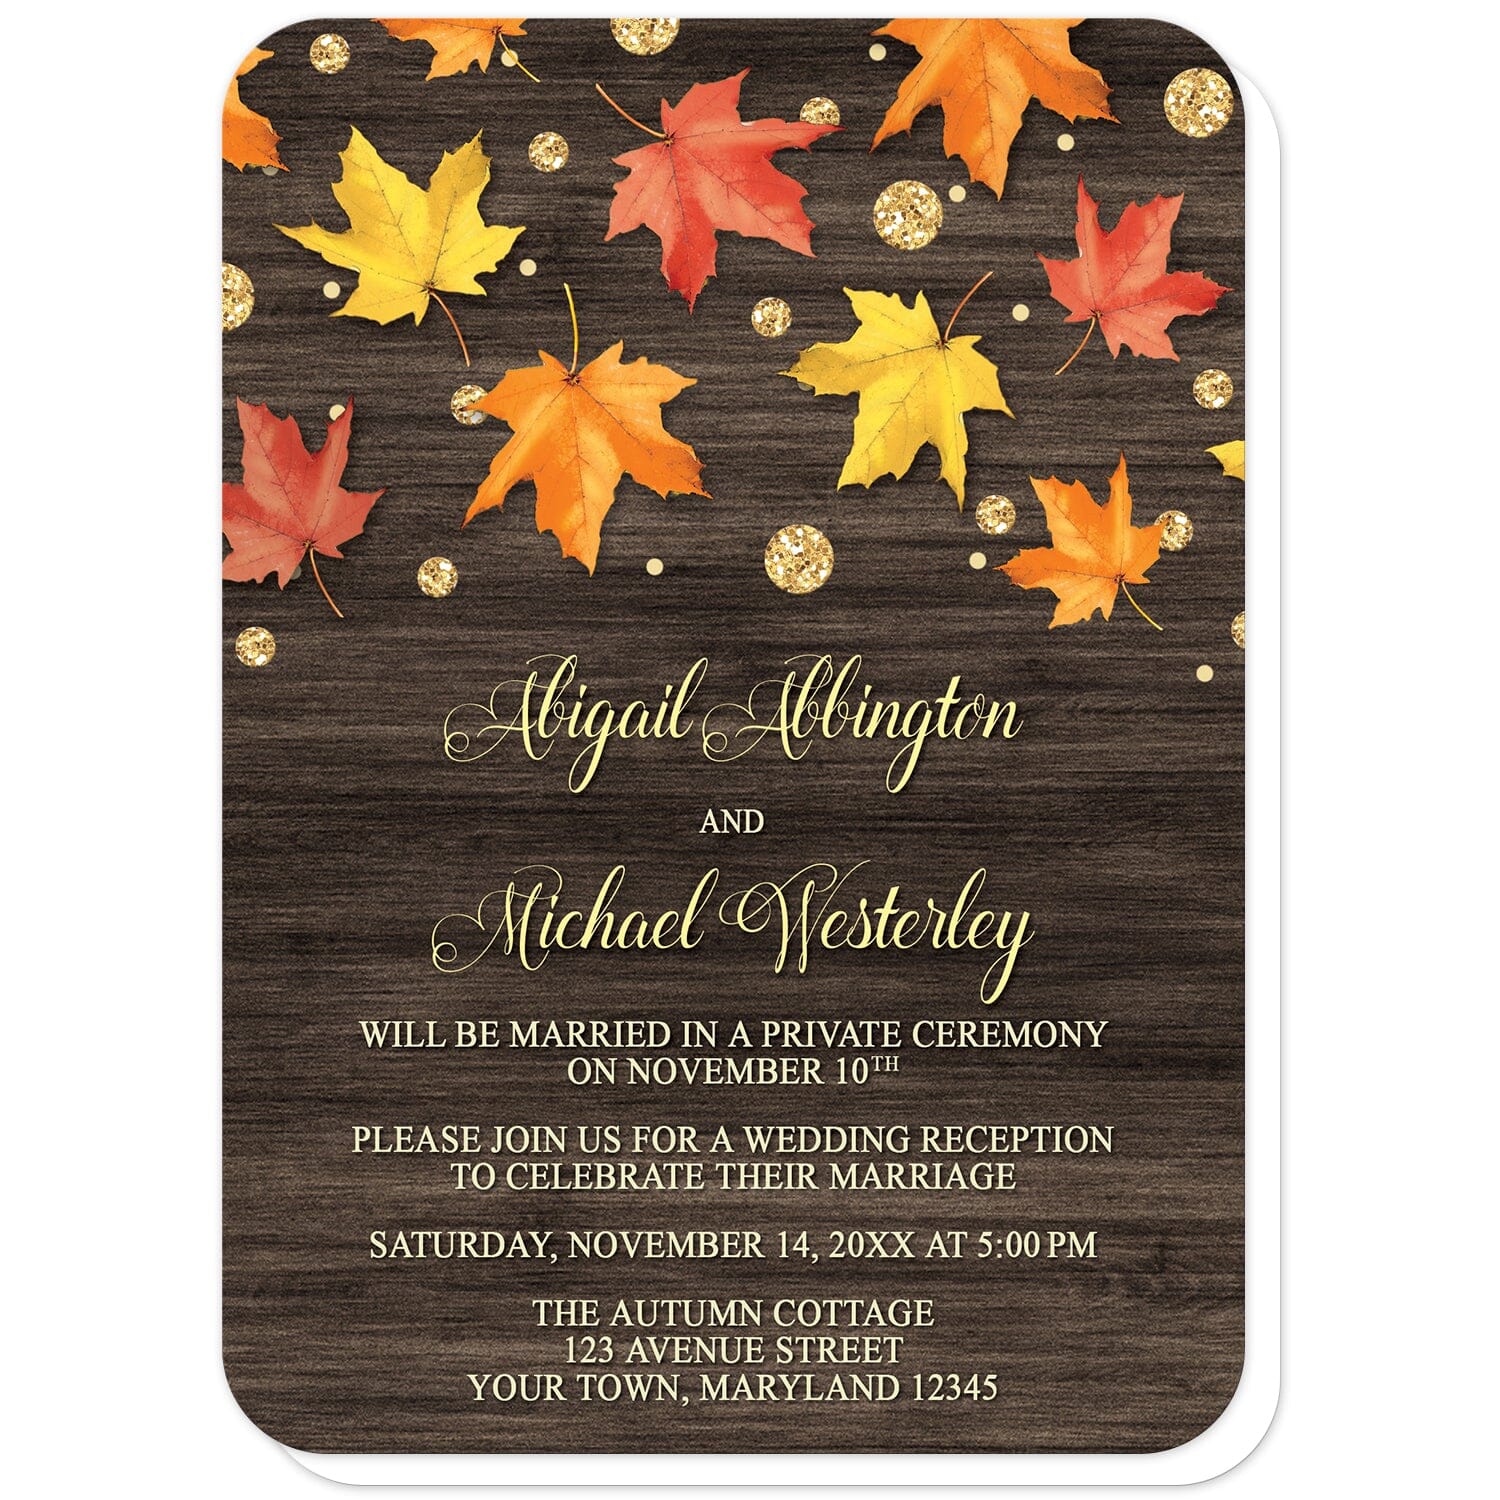 Falling Leaves with Gold Autumn Reception Only Invitations (with rounded corners) at Artistically Invited. Beautiful rustic falling leaves with gold autumn reception only invitations with red, orange, and yellow fall leaves scattered and falling along the top, coupled with gold-colored glitter-illustrated circles, over a dark brown wood background. Your personalized post-wedding reception details are custom printed in very light yellow and gold over the wood background.